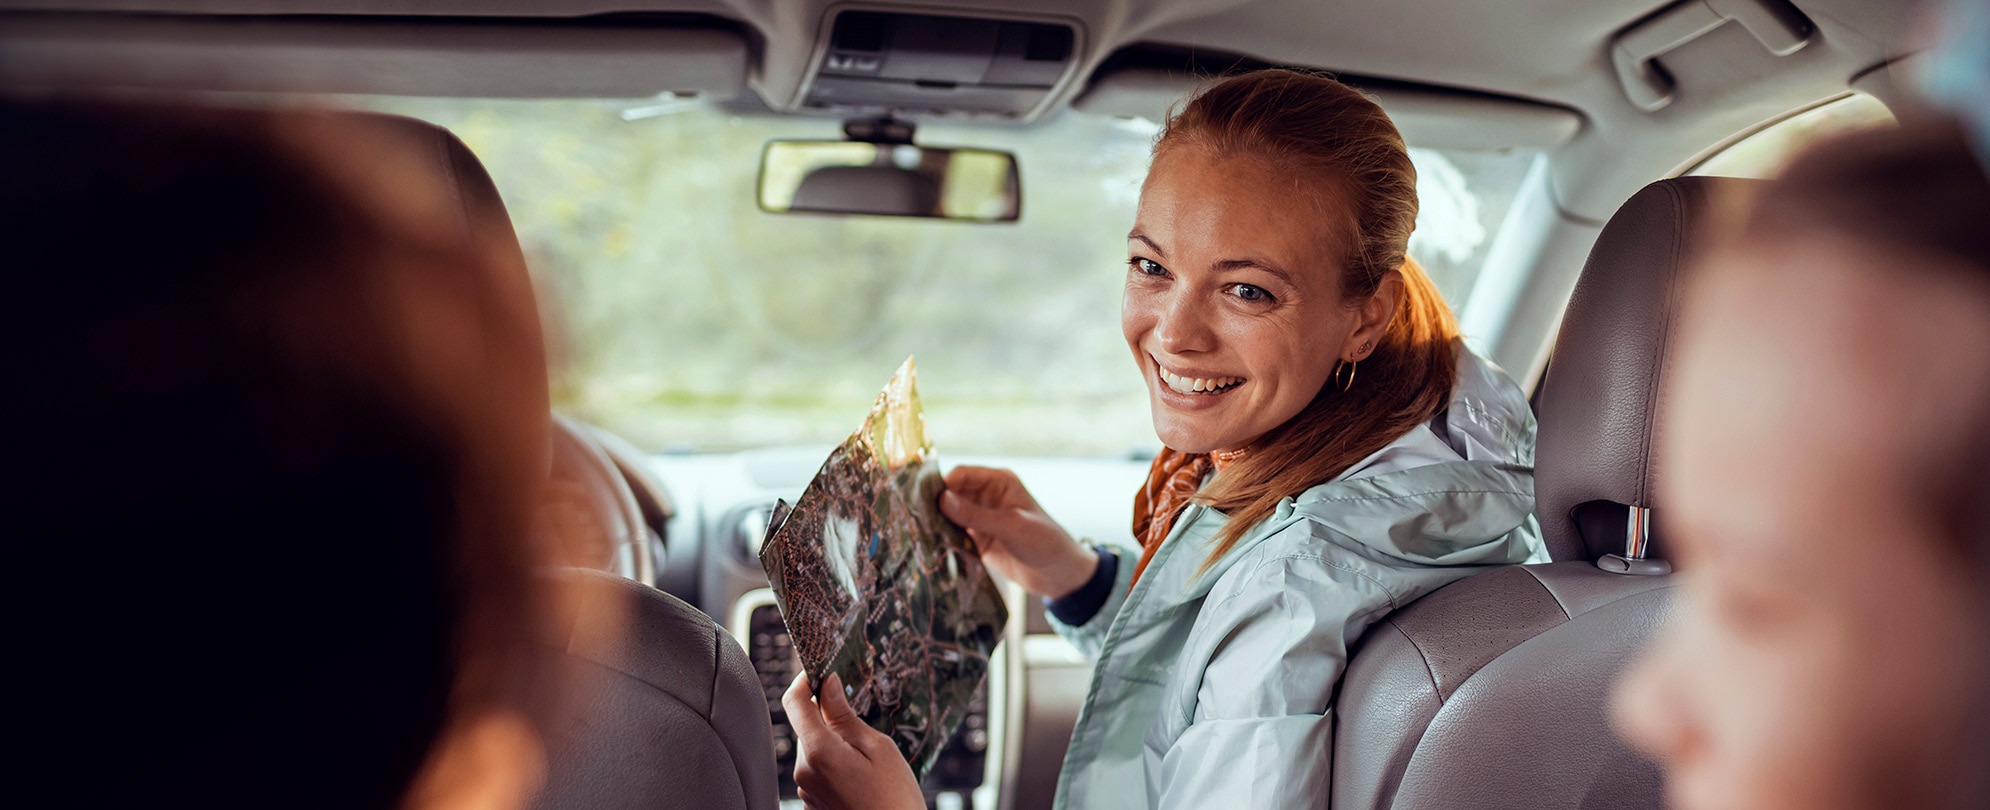 A woman holding a map and sitting in a car smiling. 